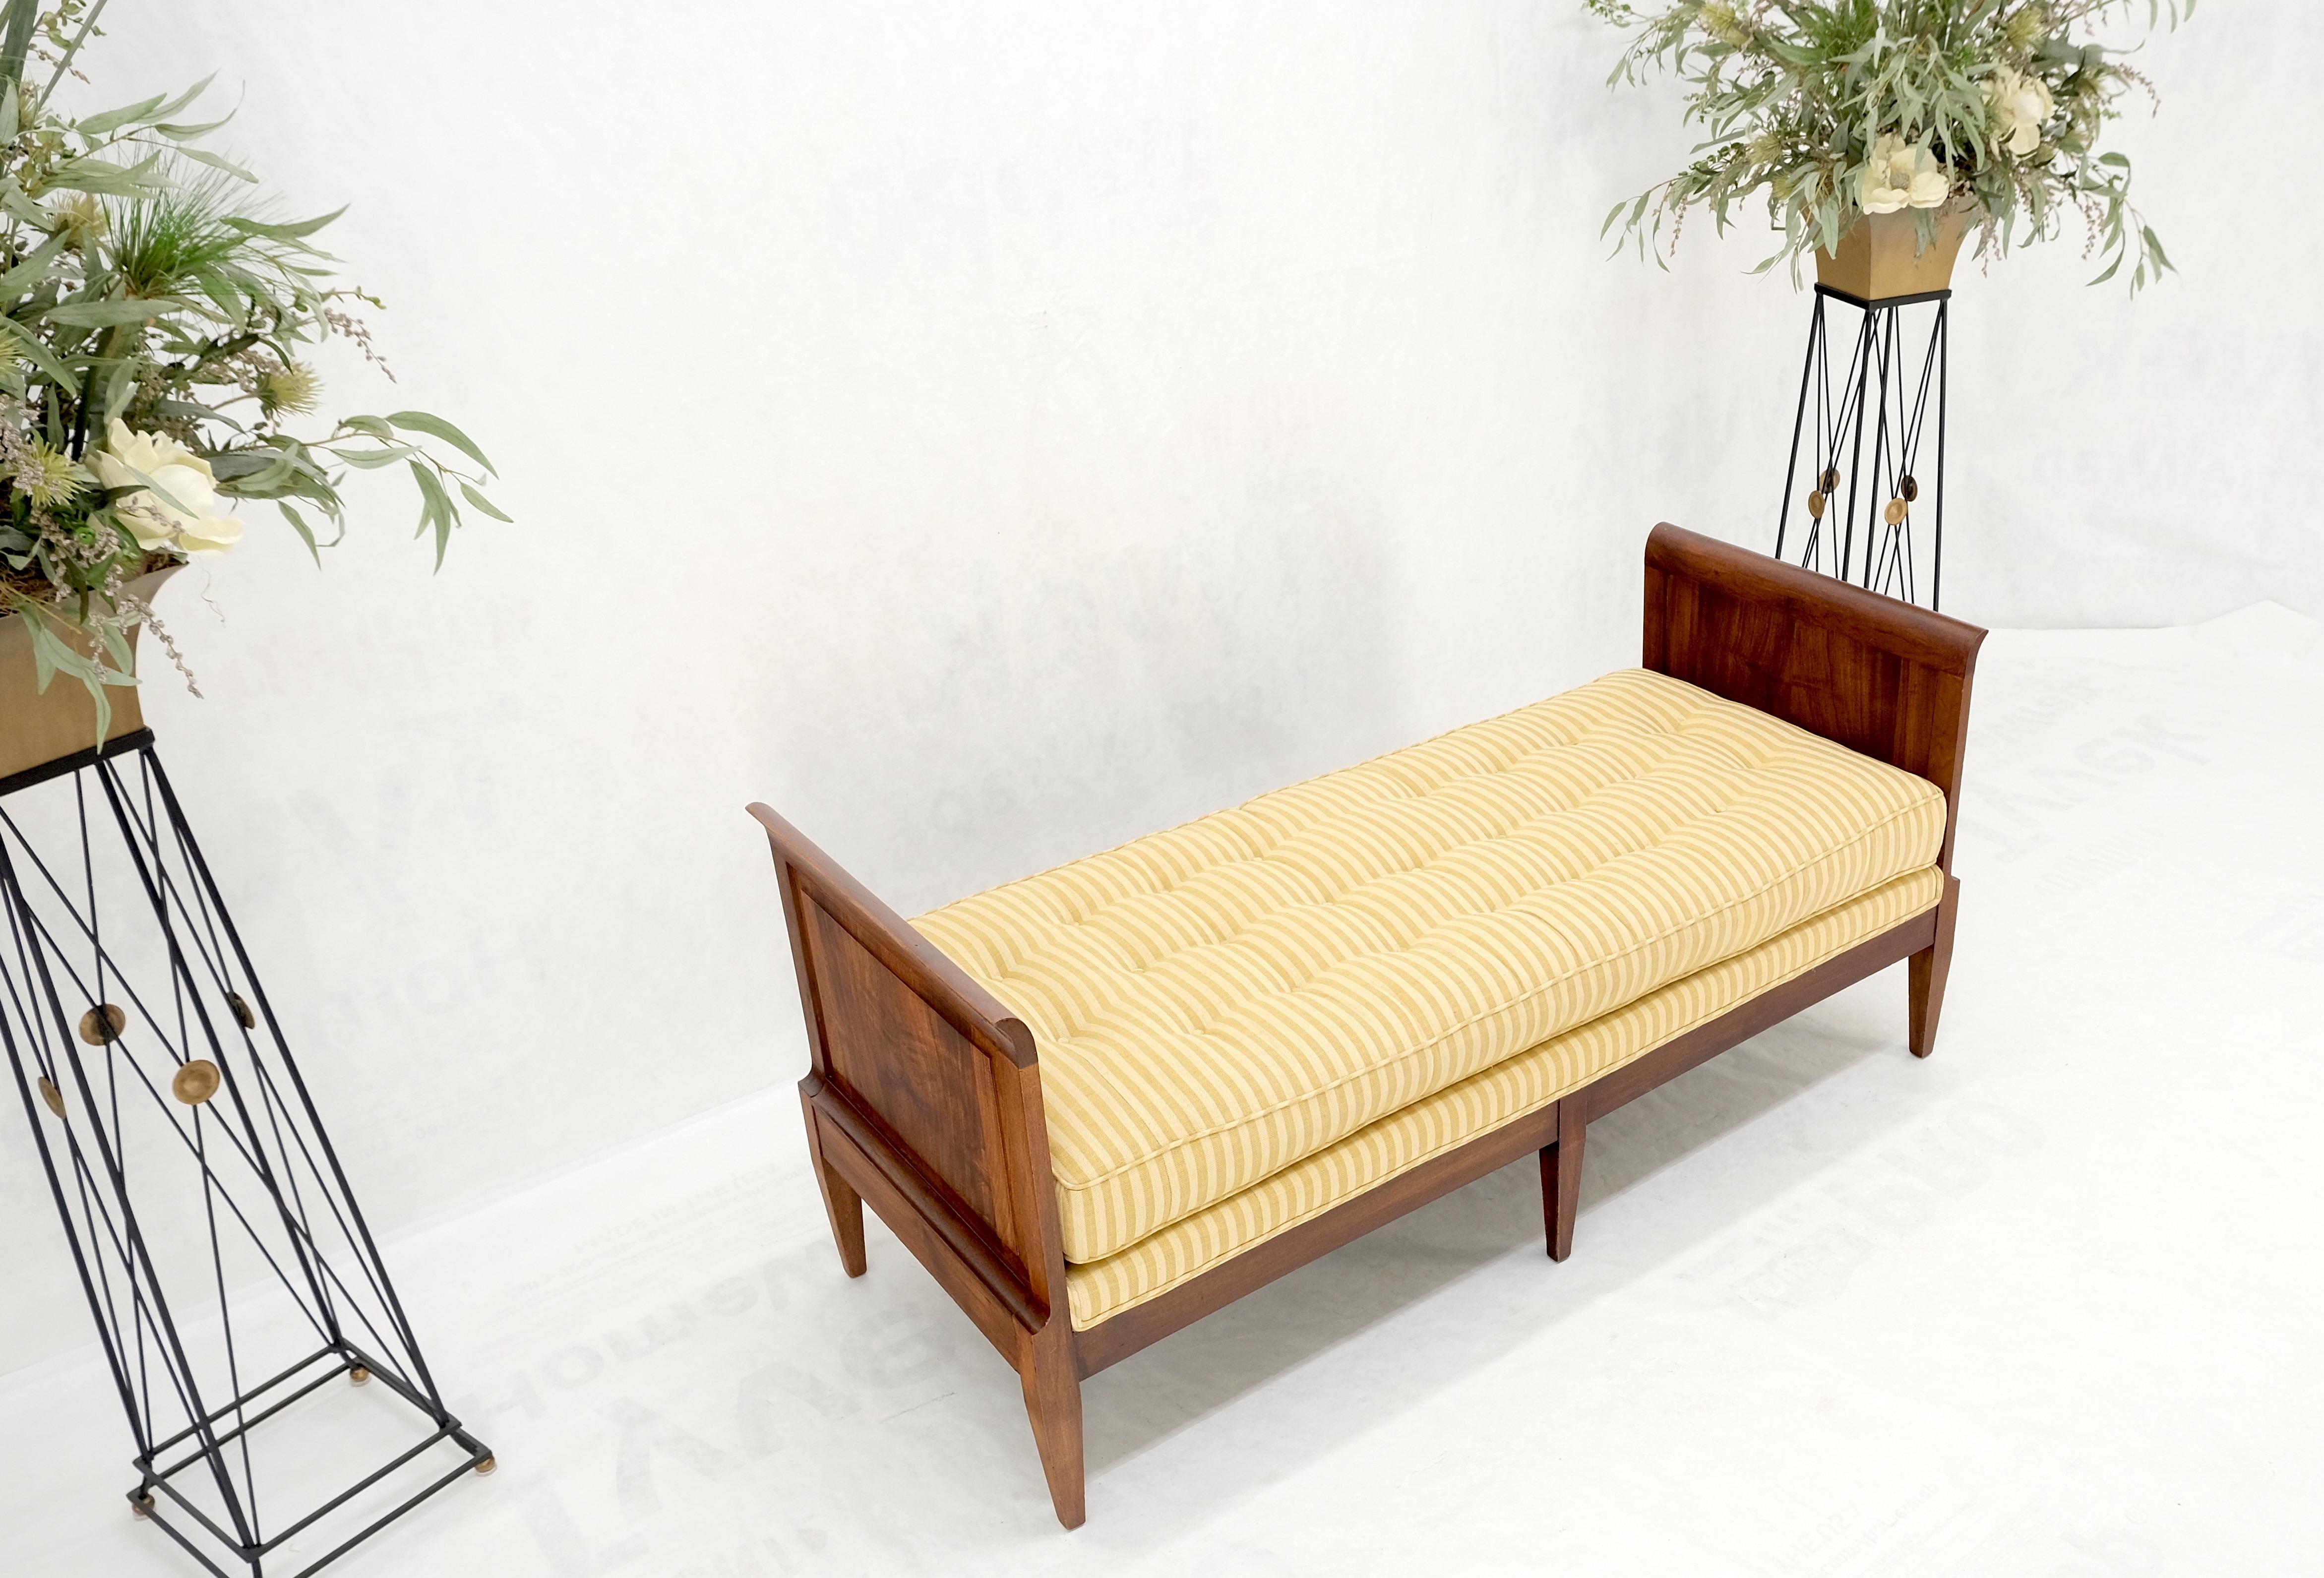 Upholstery Mahogany Slight Panels Arms Compact Daybed Style Gold Stripe Window Bench MINT! For Sale